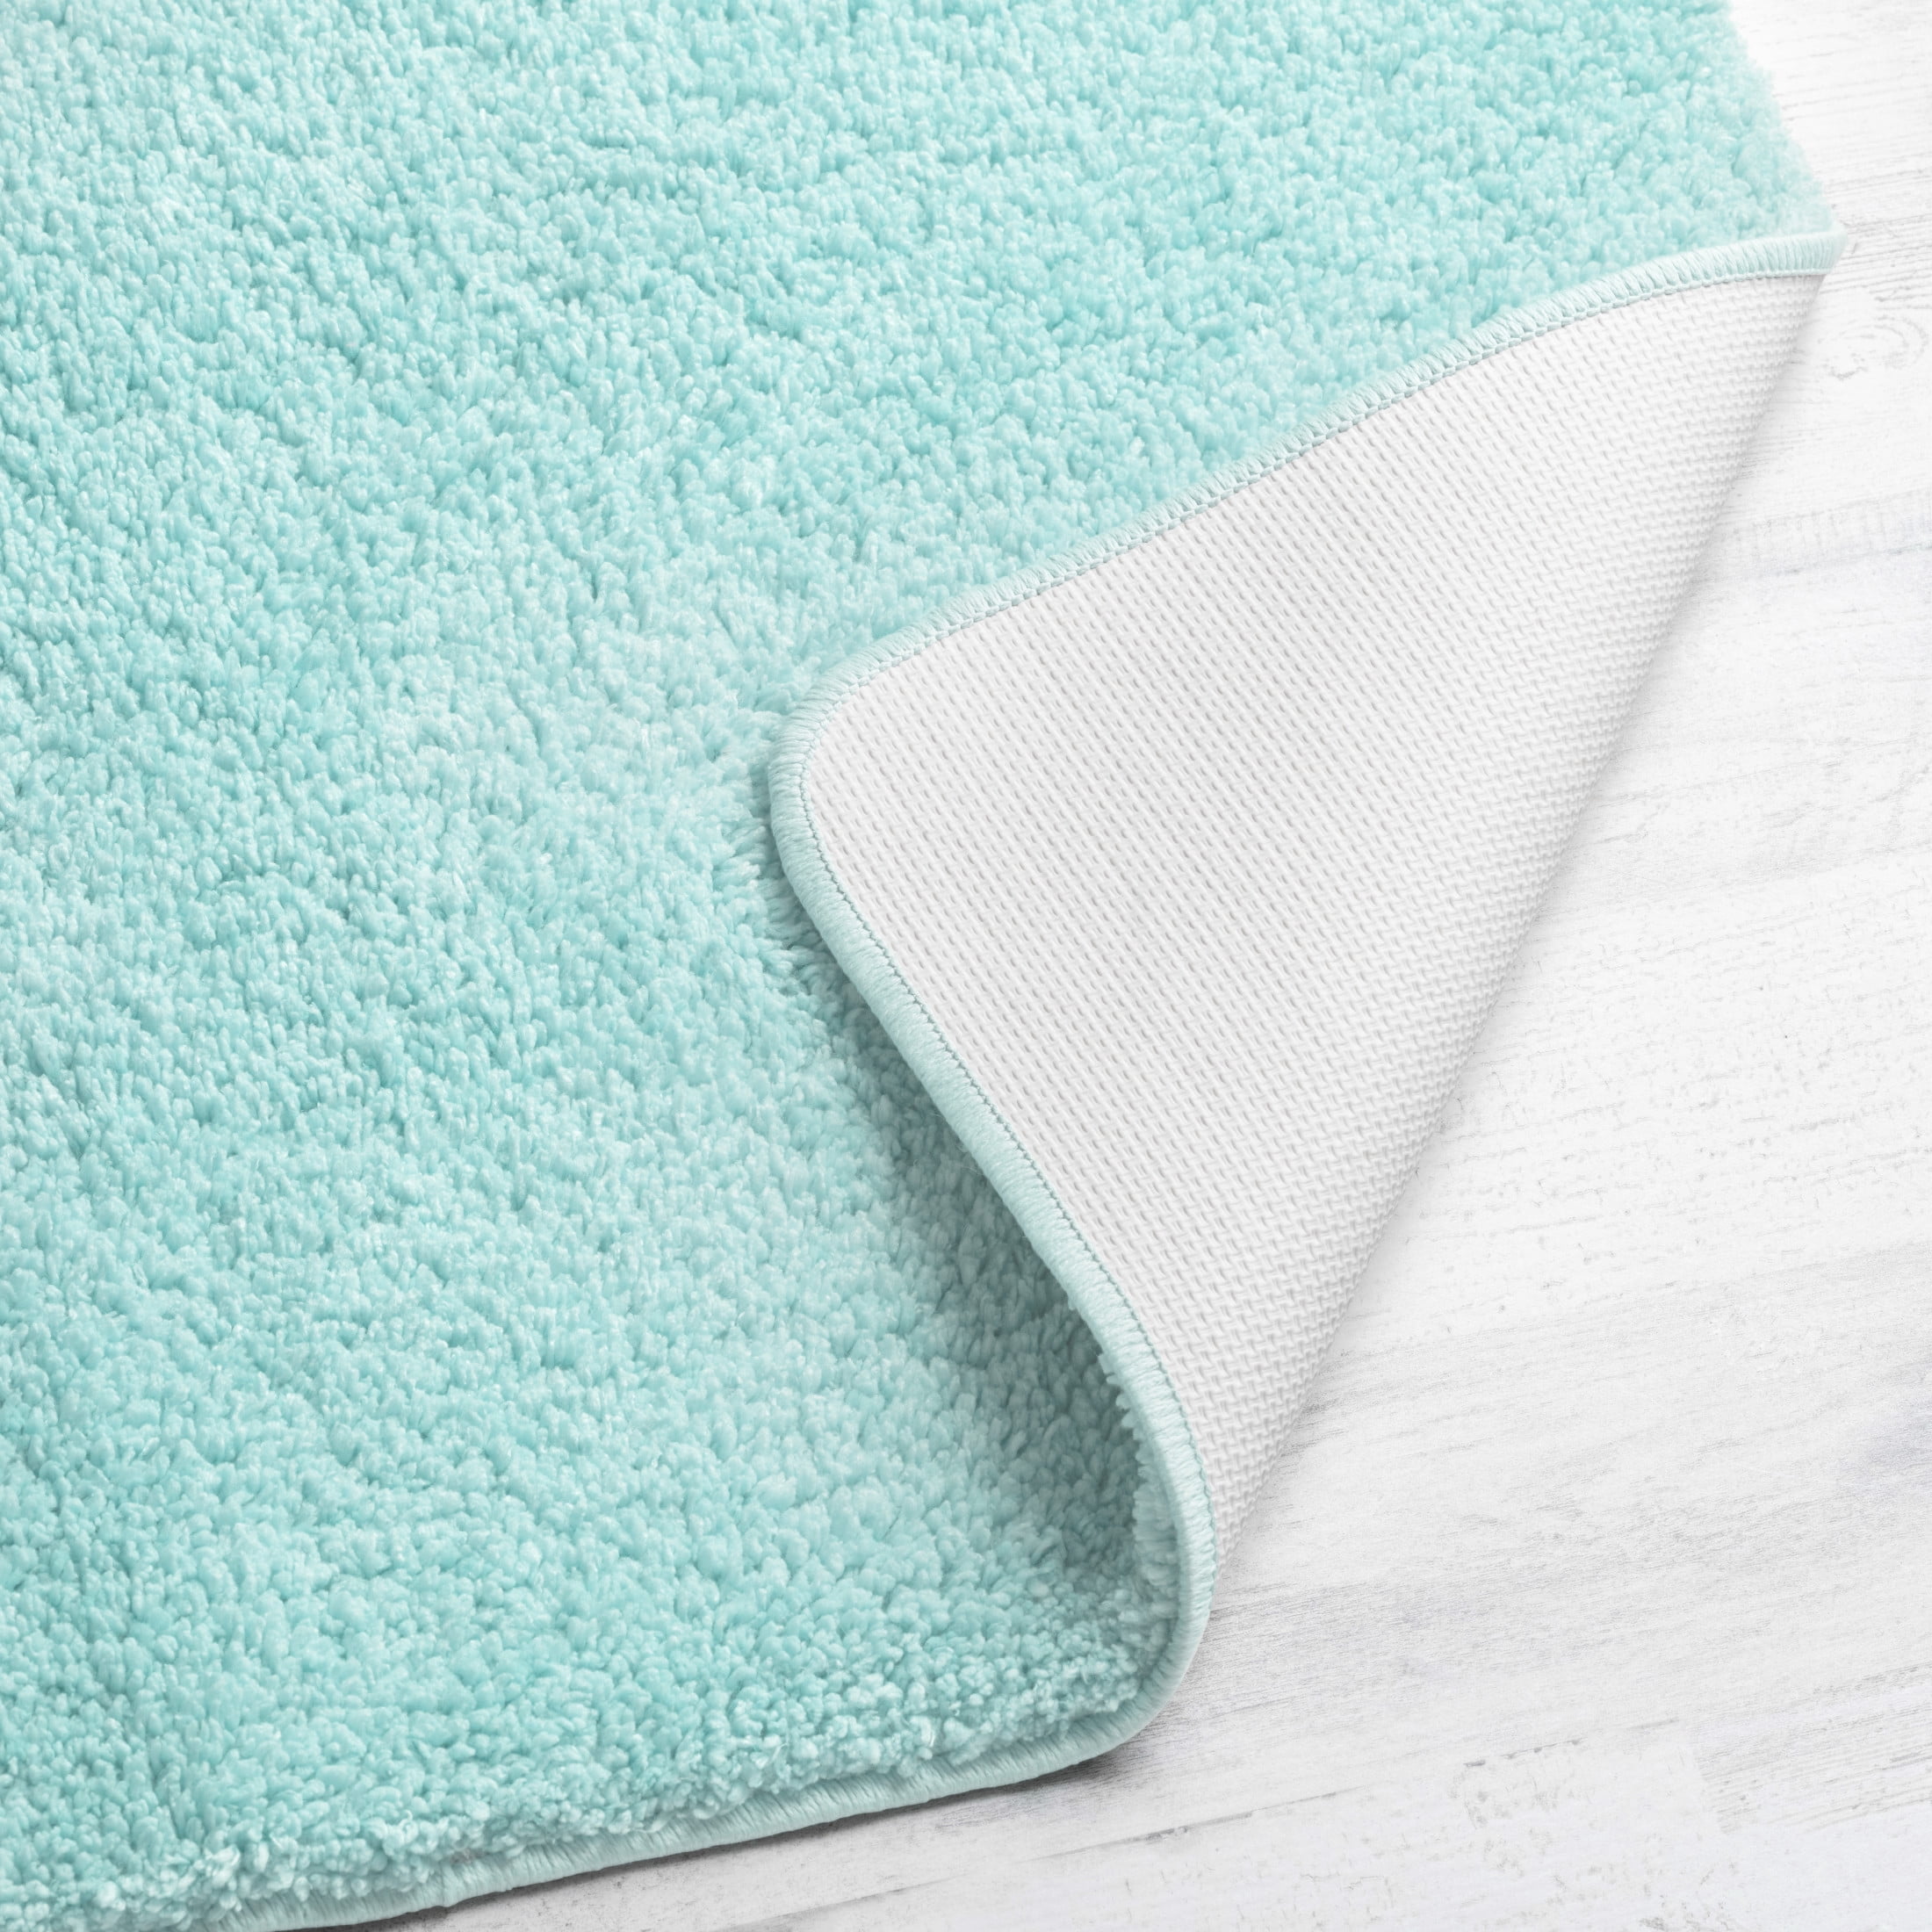 Mainstays Basic 2 Piece Polyester Bath Rug Set, 20 inch x 32 inch Rug and Contour Rug, Clearly Aqua, Size: 2 Piece (20 inchx32 inch and contour)